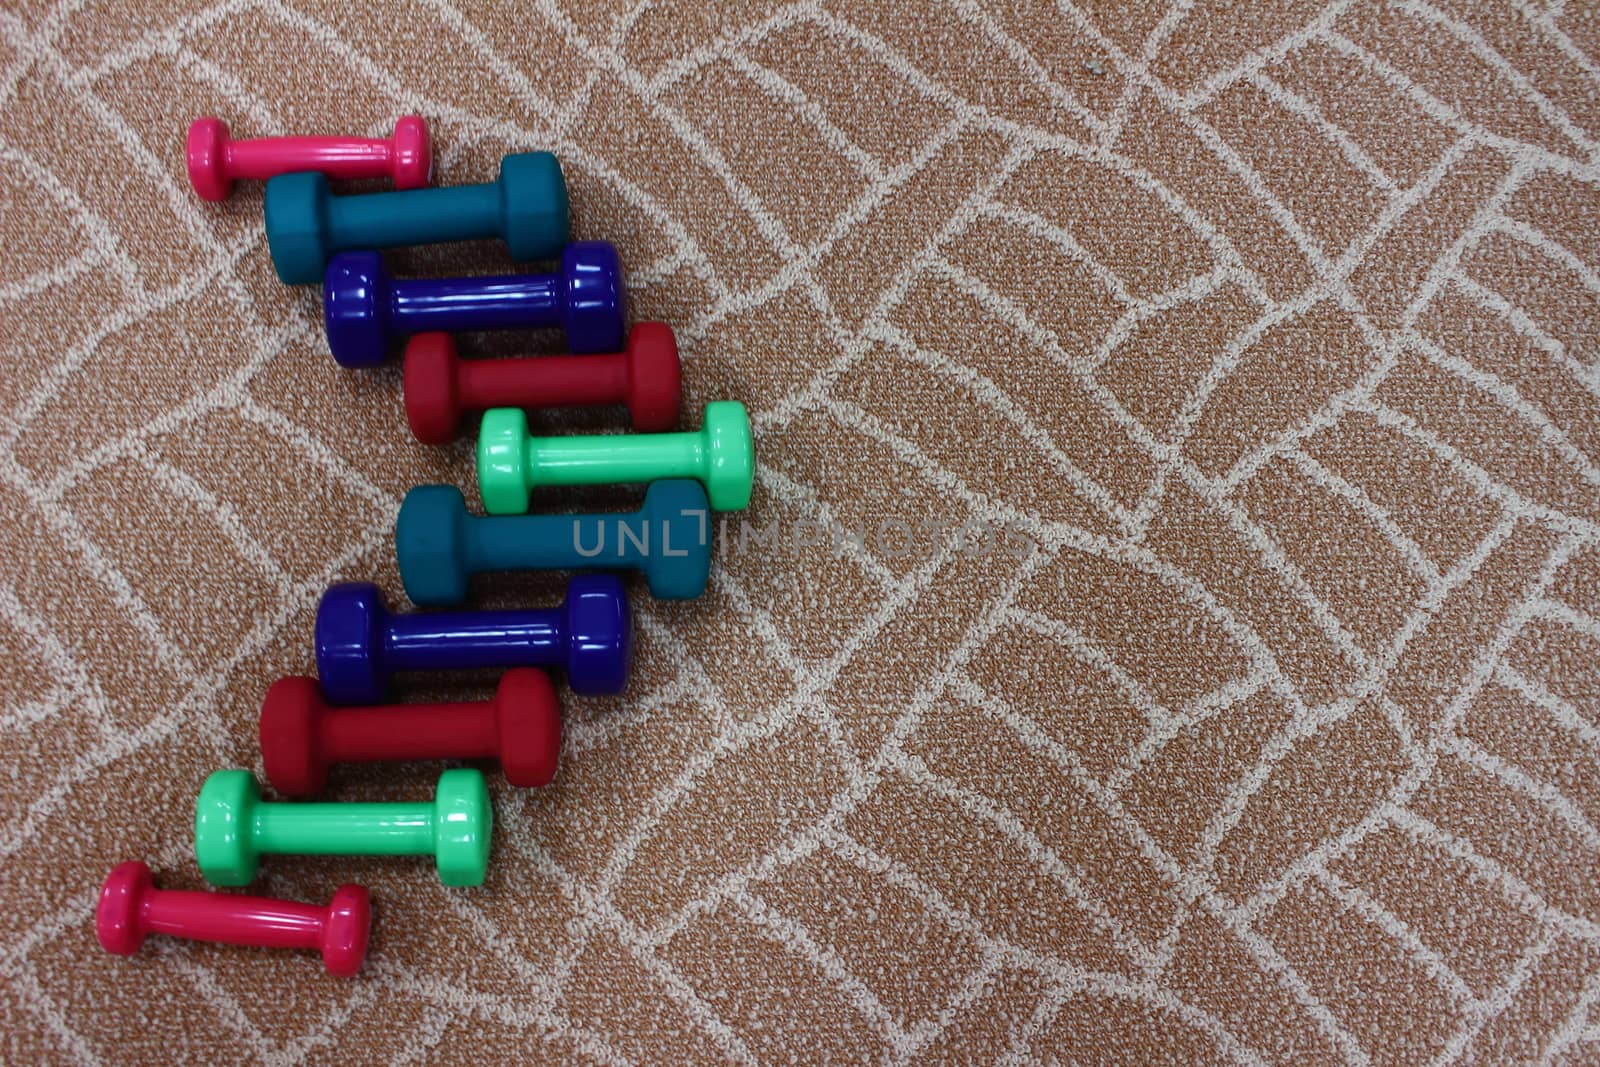 Colorful dumbbells lined up in an arrow pointer on the carpet in the gym